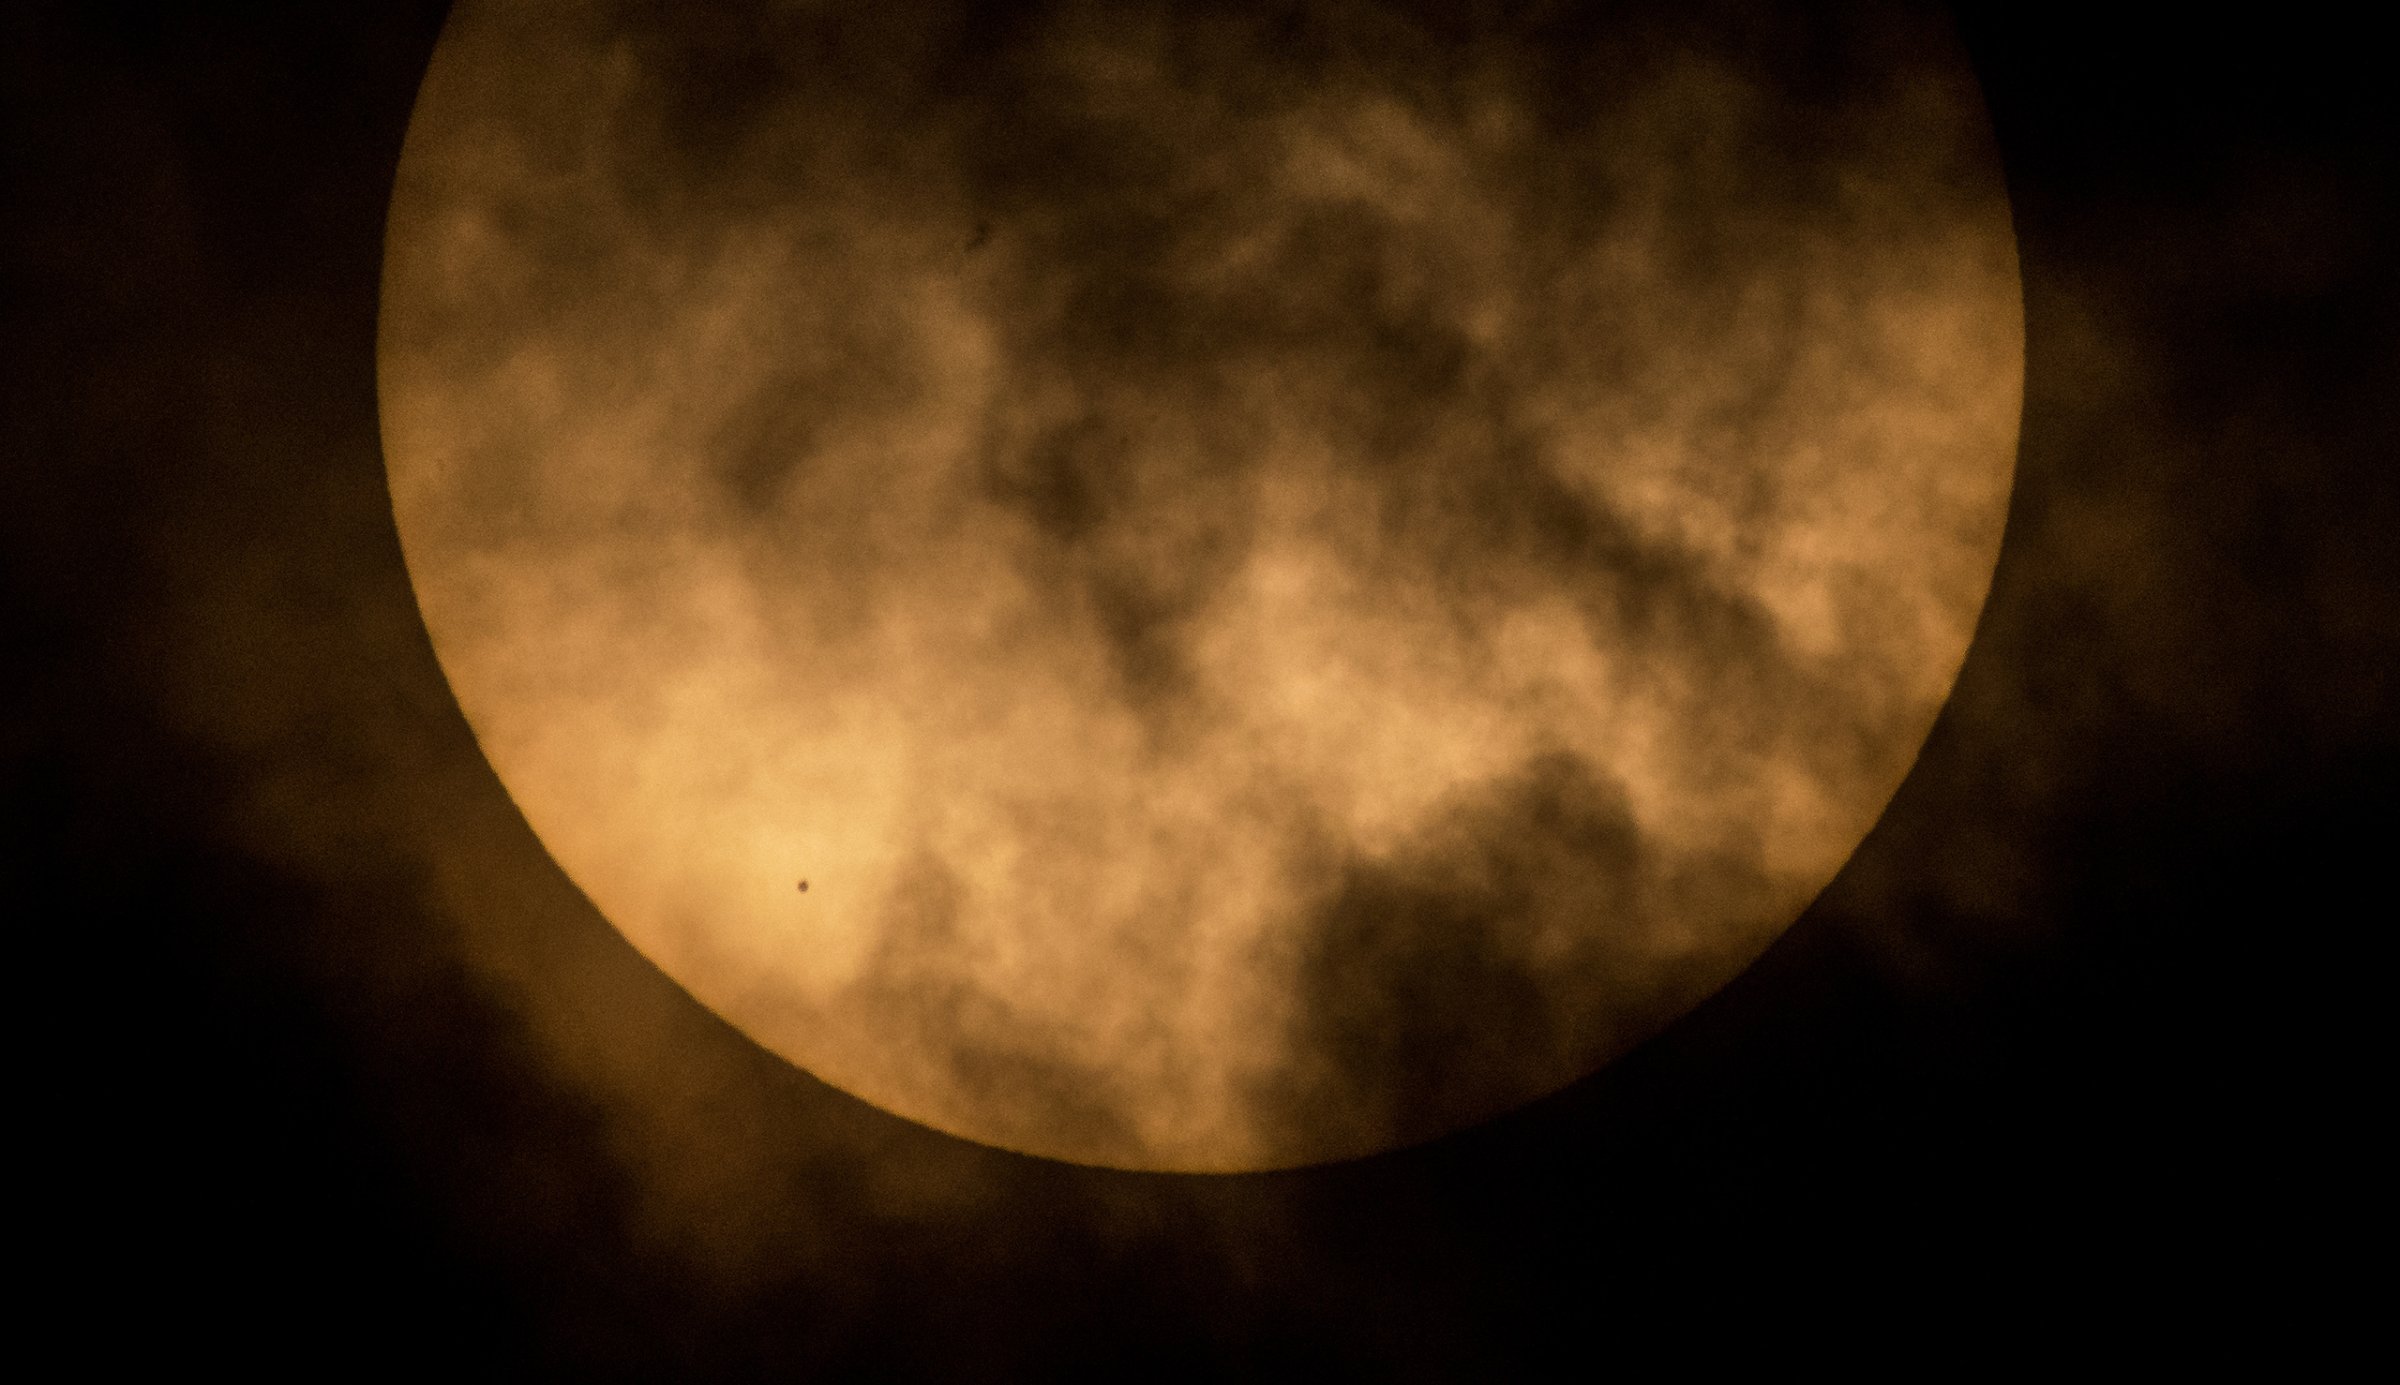 The planet Mercury is seen in silhouette, lower left, as it transits across the face of the sun in this photo taken from NASA Headquarters in Washington, DC., May 9, 2016.